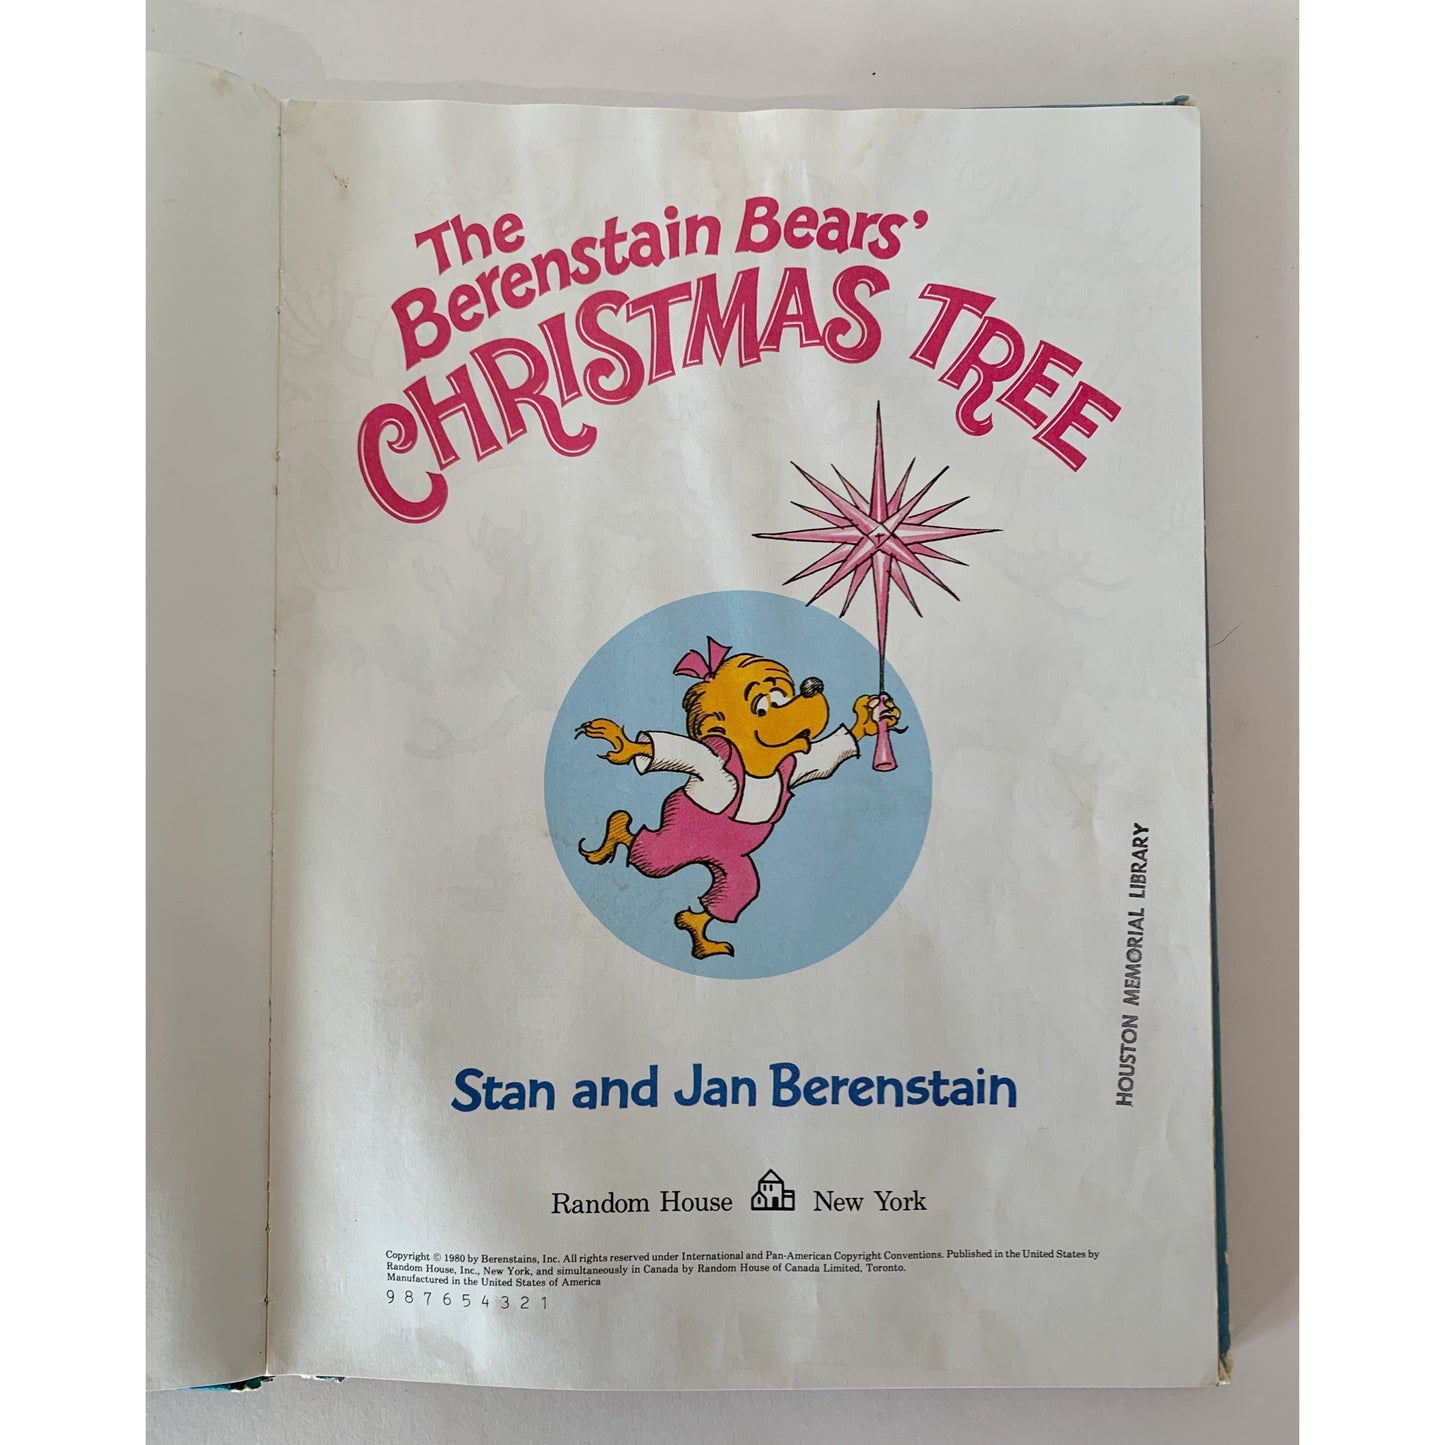 The Berenstain Bears' Christmas Tree, Hardcover, 1980, First Edition